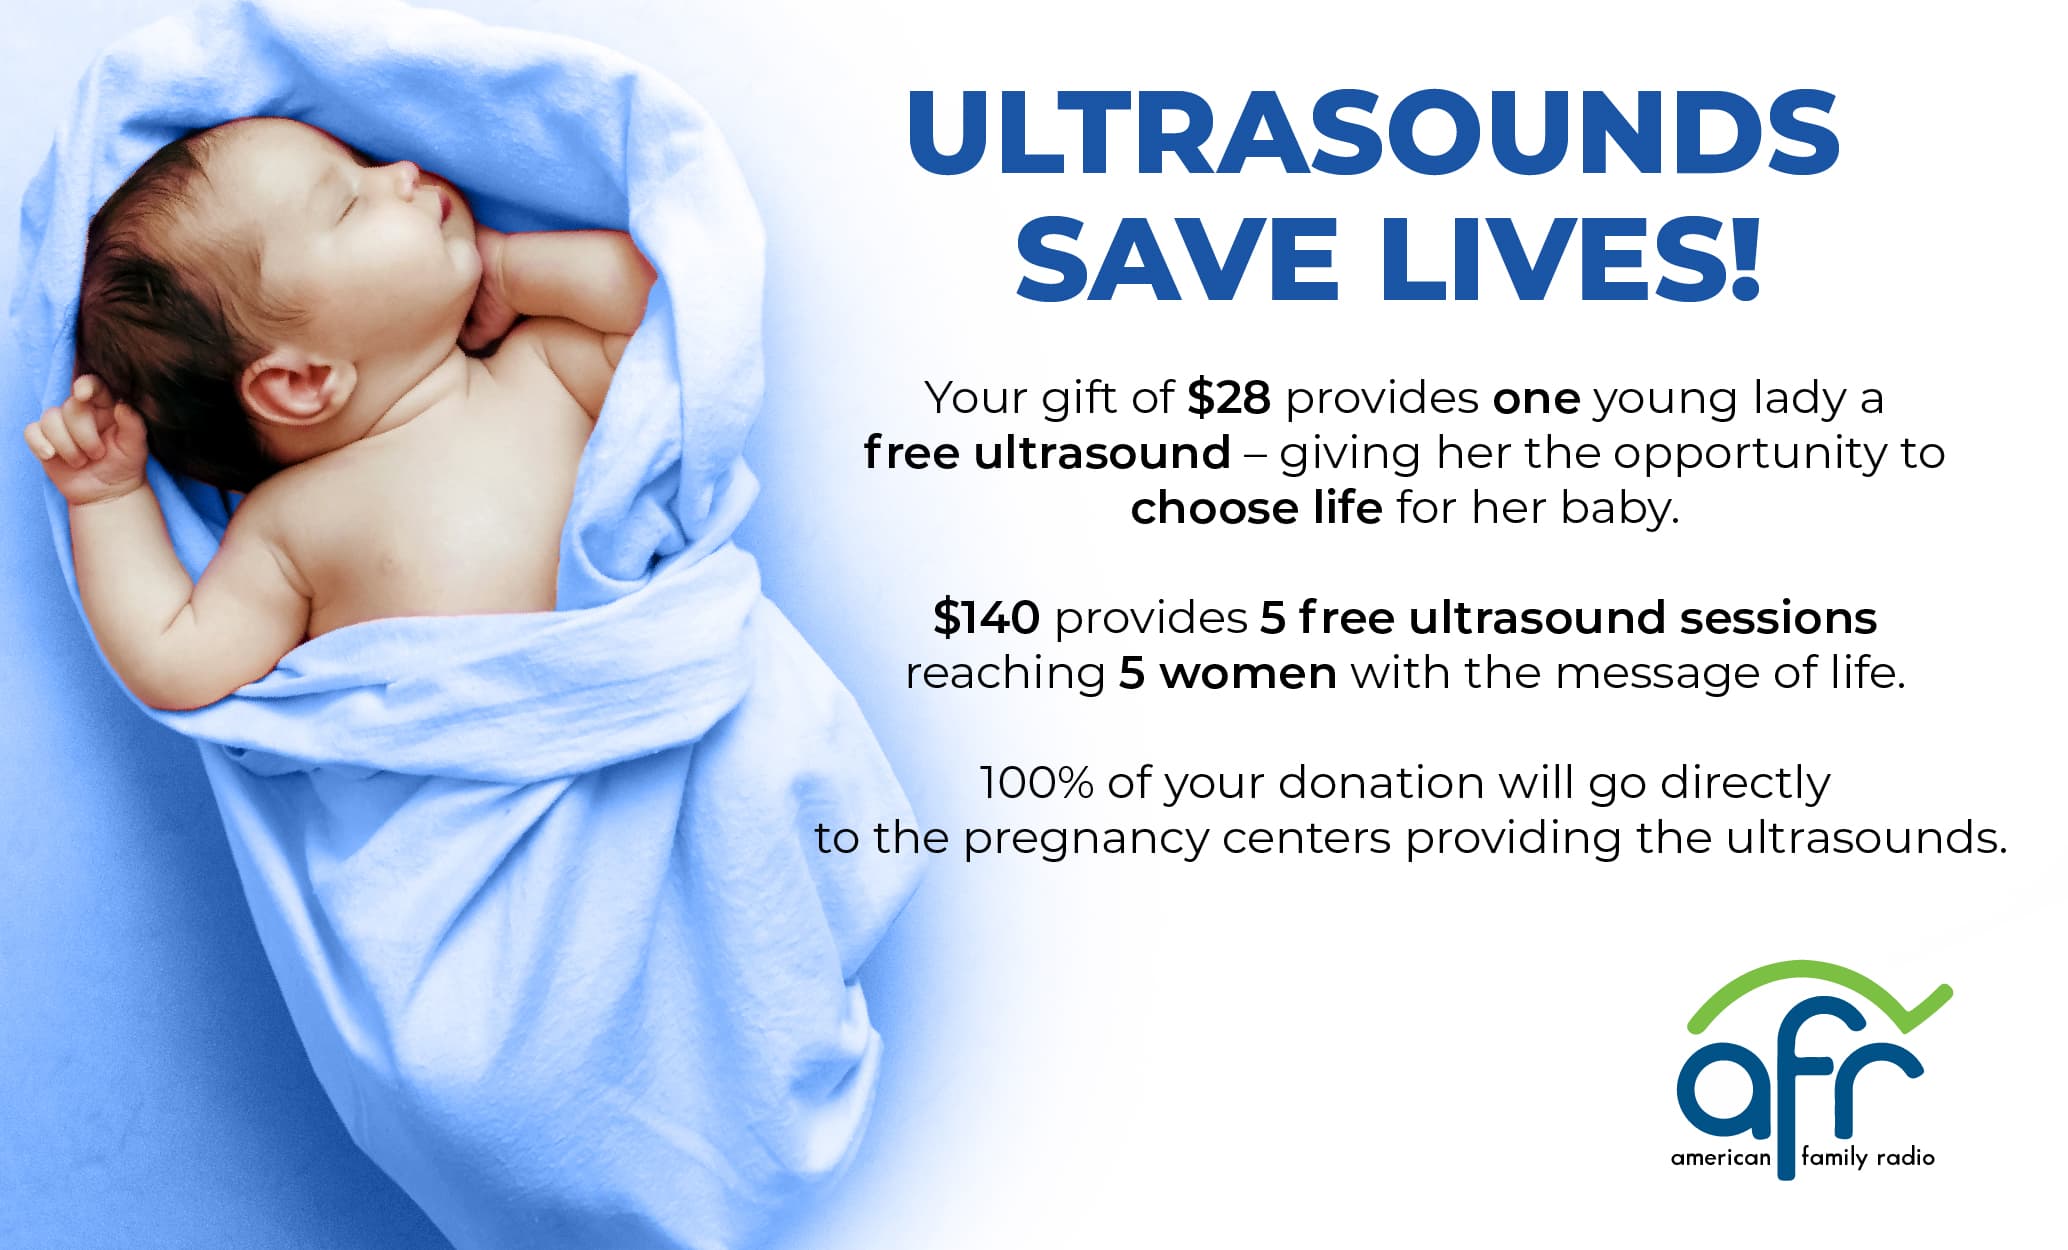 Ultrasounds save lives! Your gift of $28 provides one young lady a free ultrasound - giving her the opportunity to choose life for her baby. AFR - American Family Radio